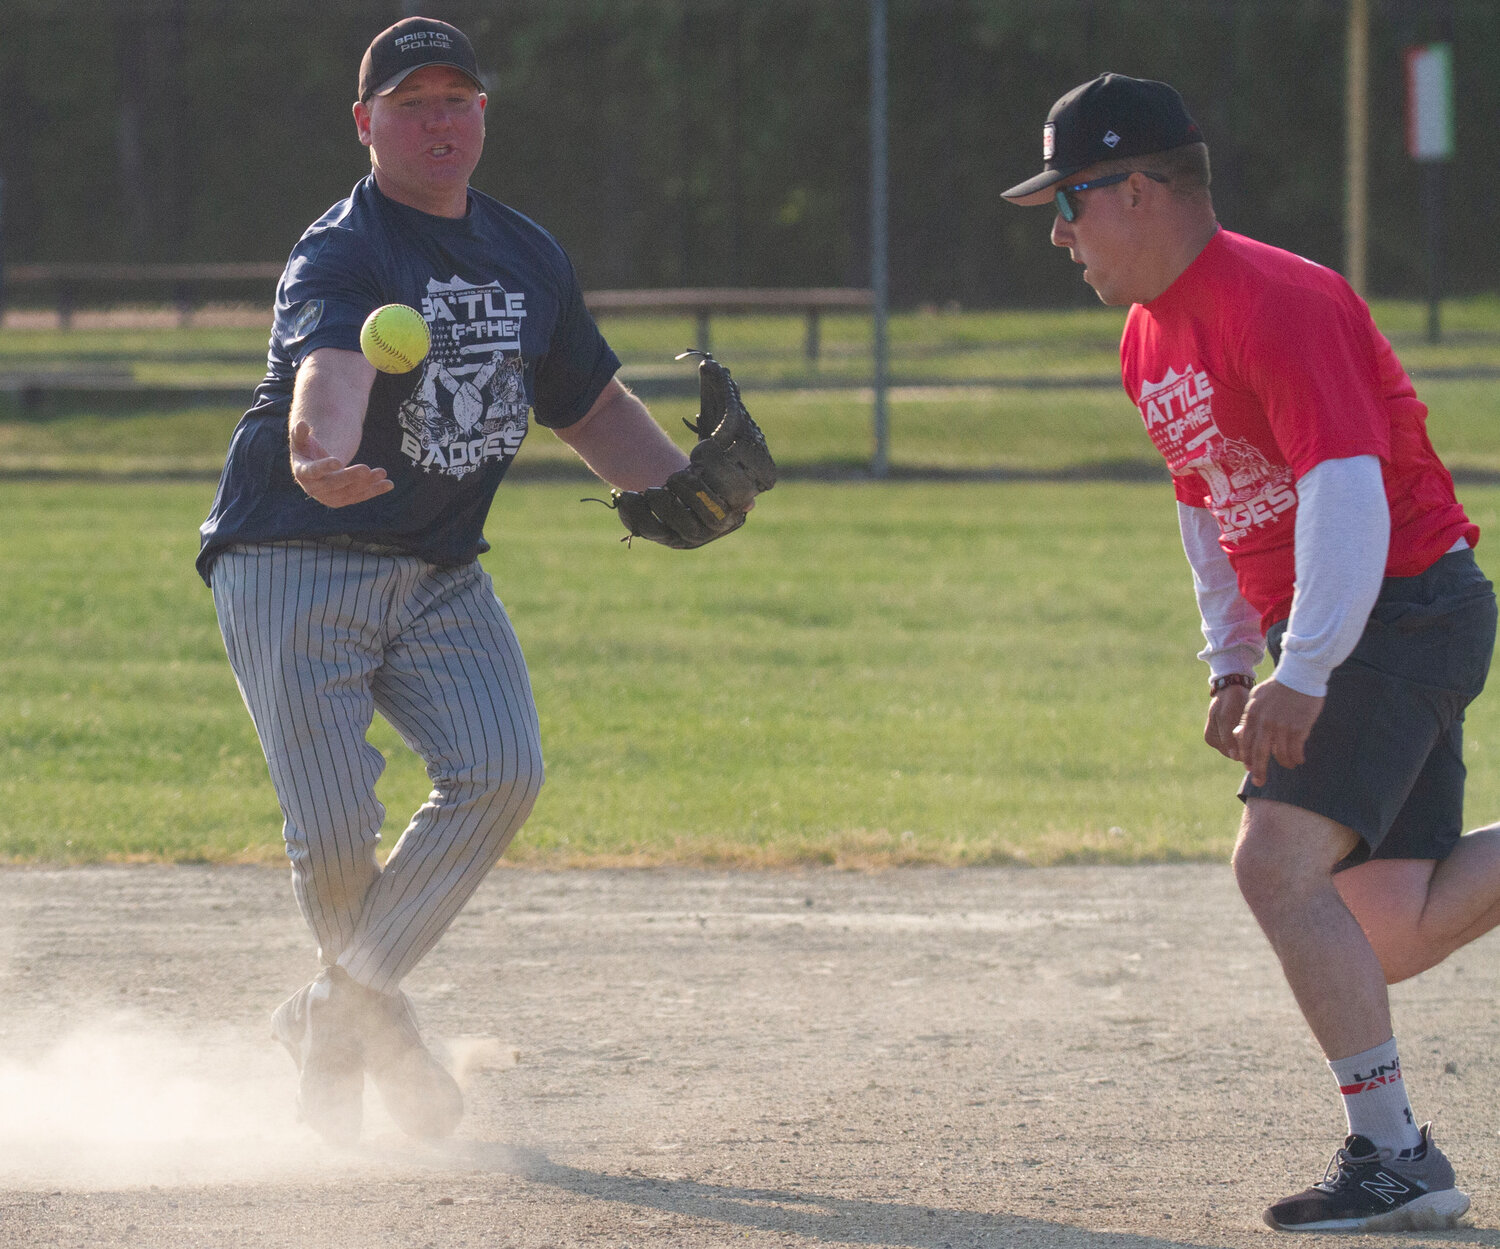 Second baseman Mike Kelly bobbles the ball and tags out a firefighter.